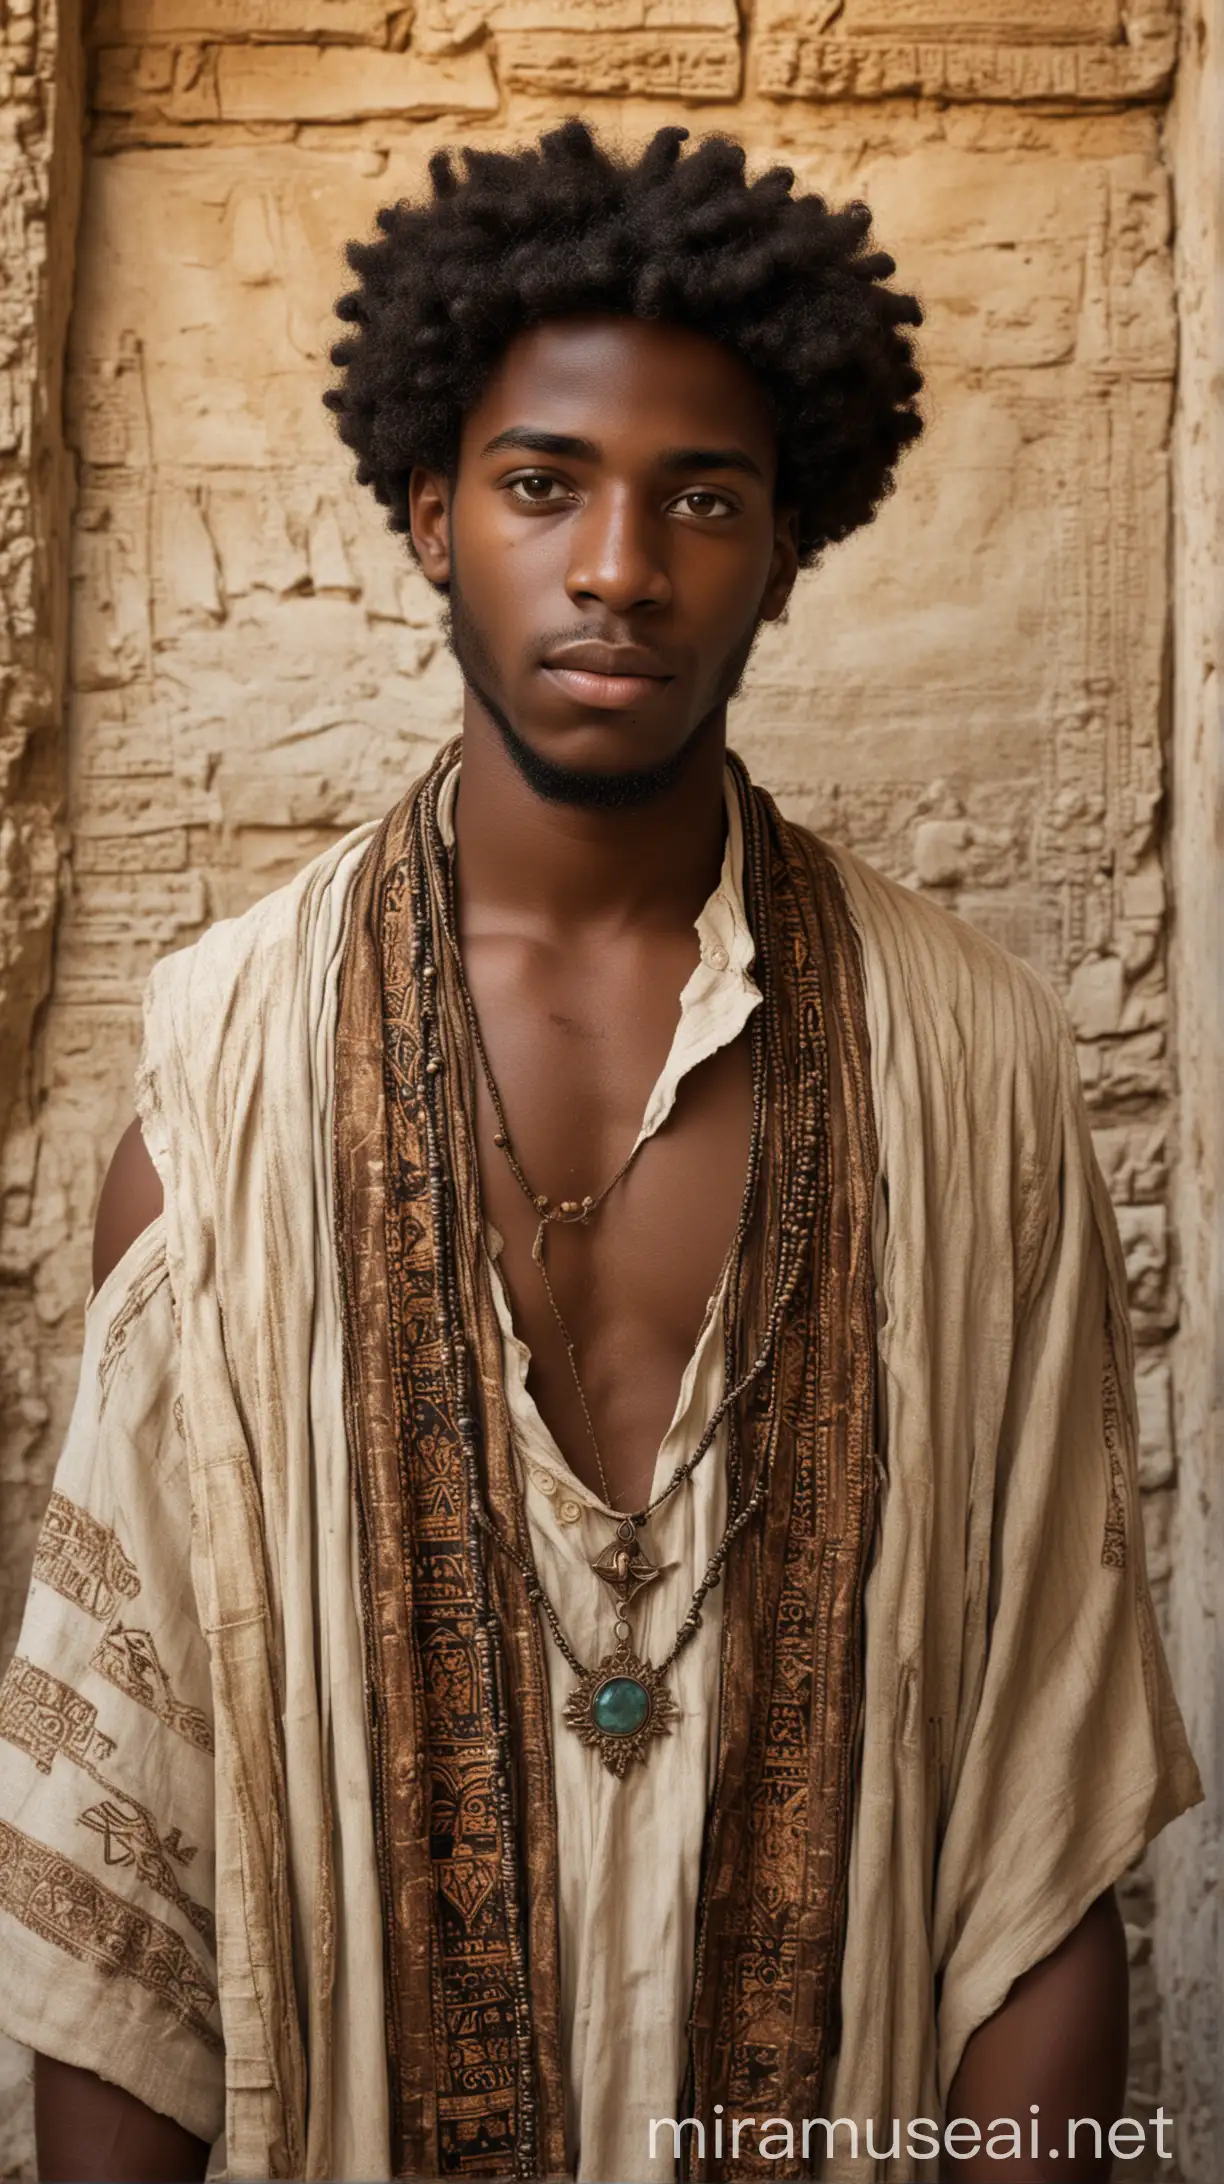 Young Black Jewish Man in the Ancient World